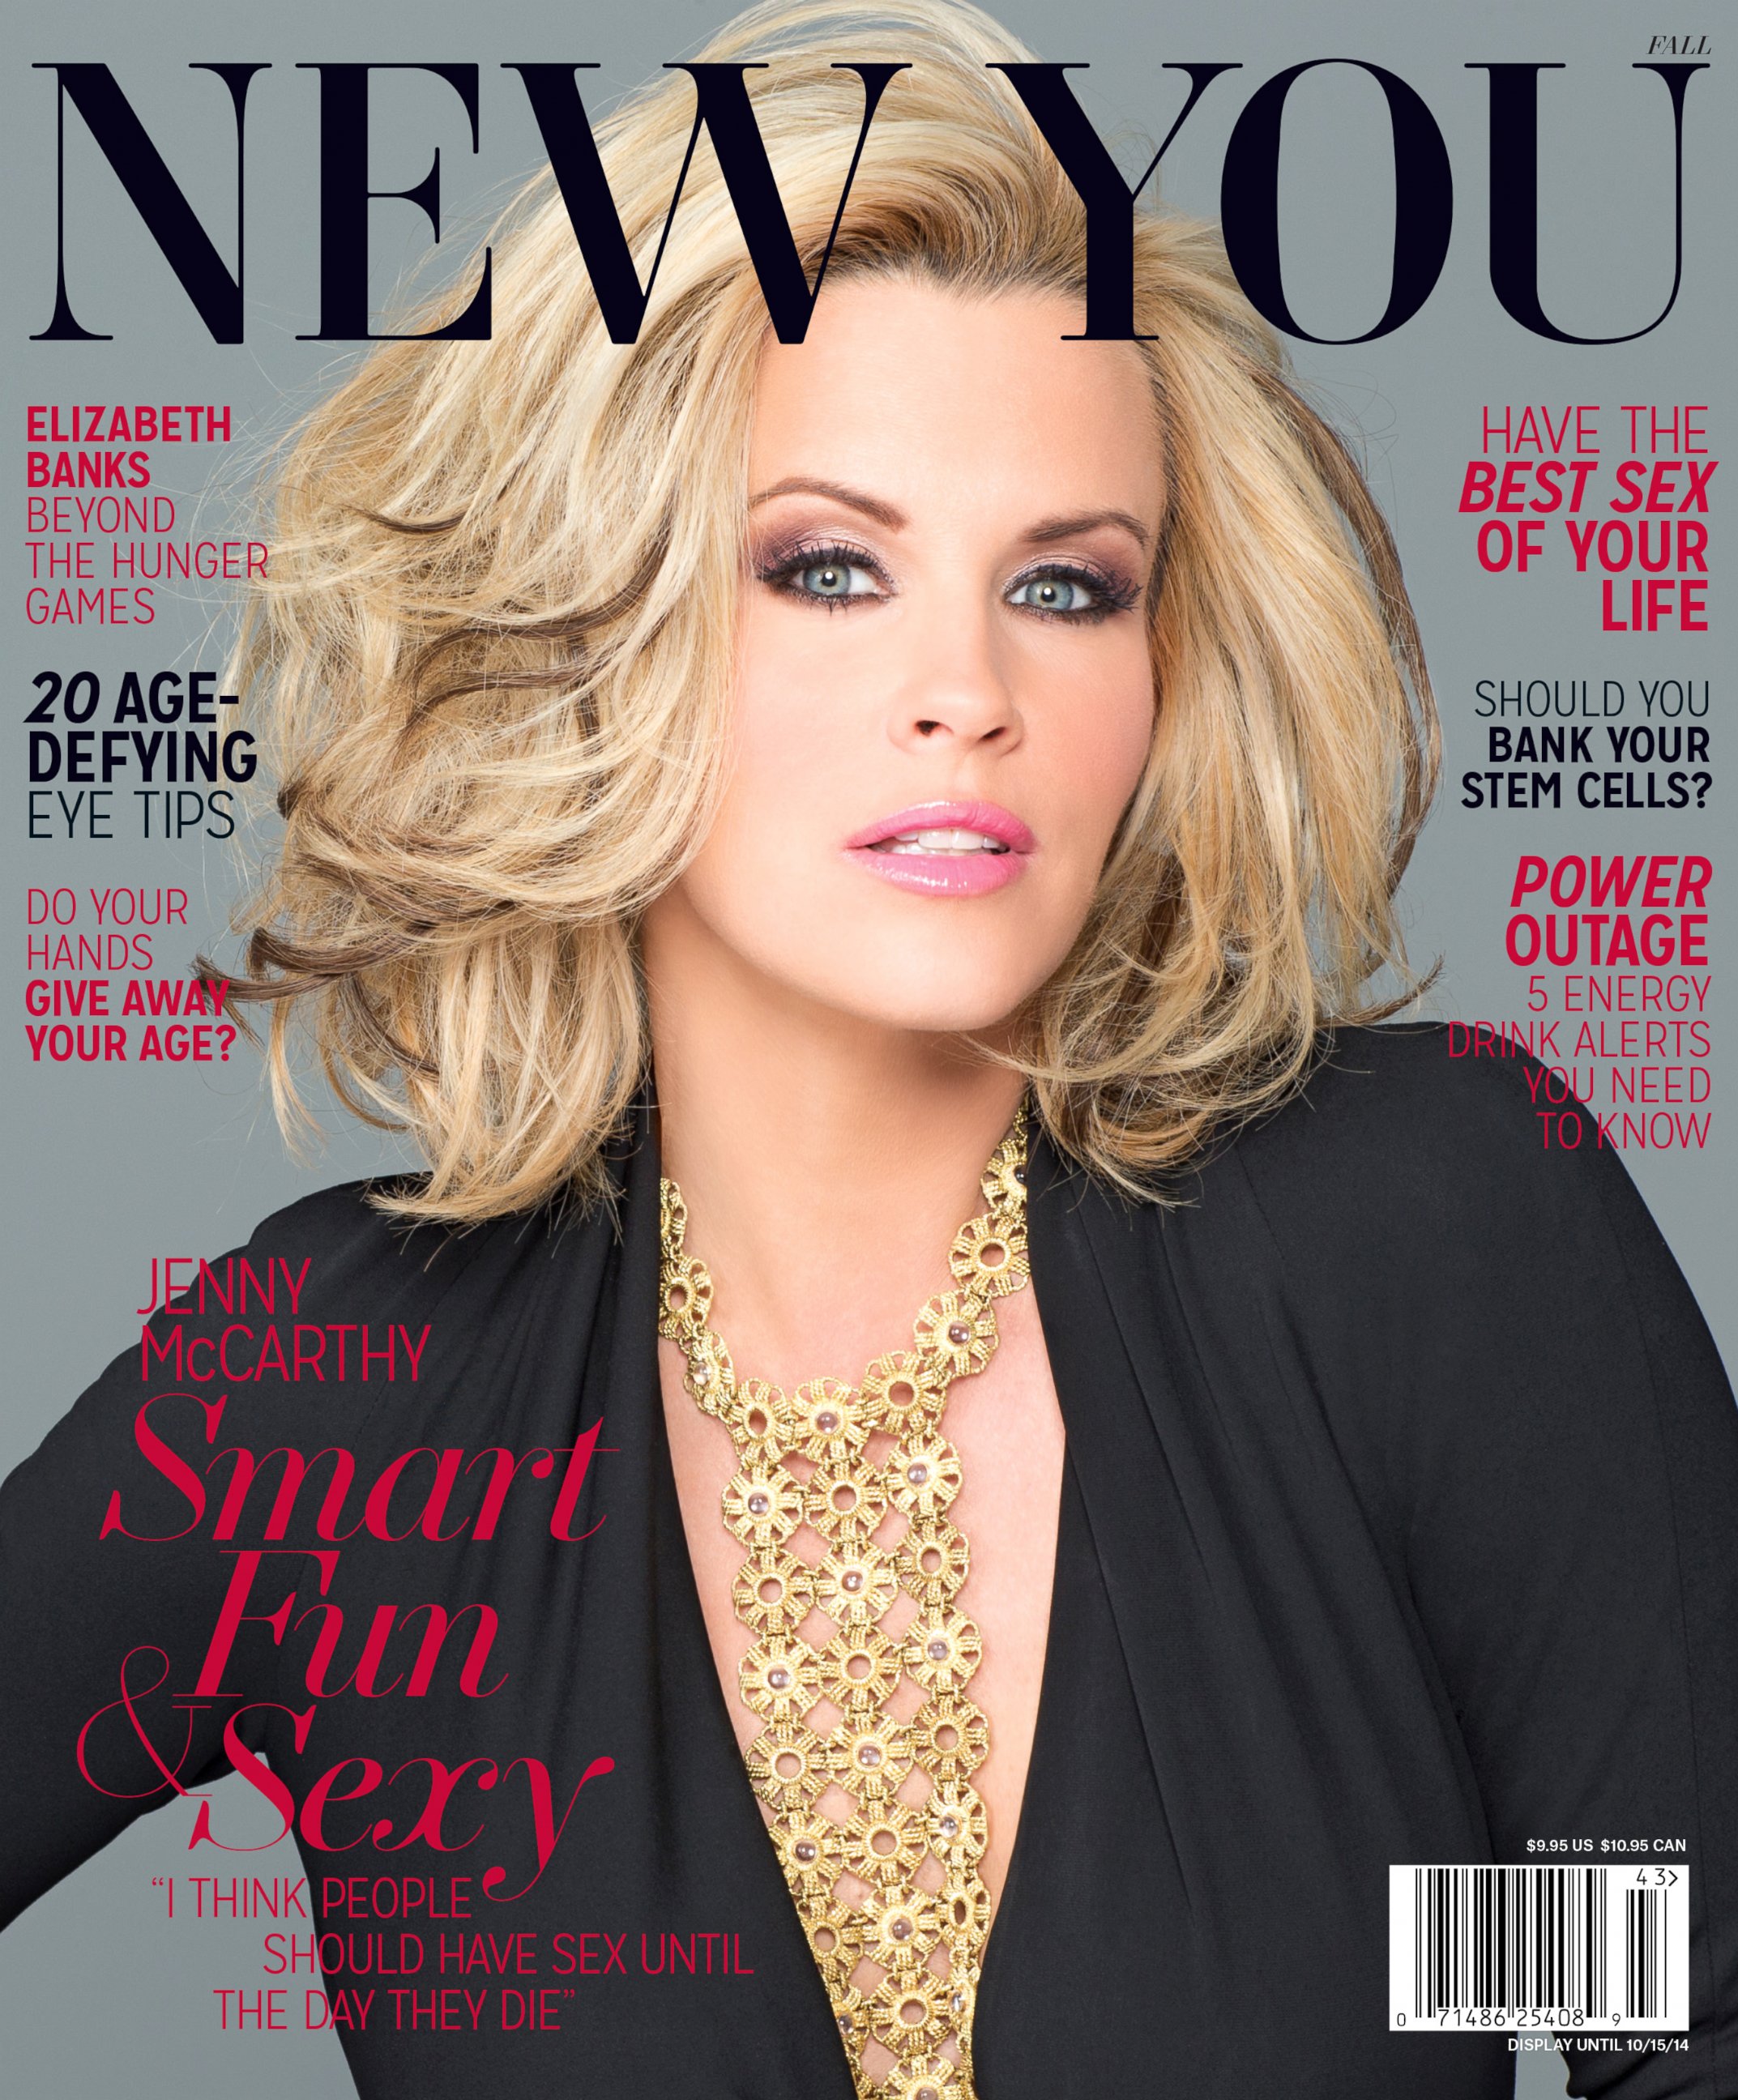 PHOTO: Jenny McCarthy on the cover of the fall issue of New You magazine.